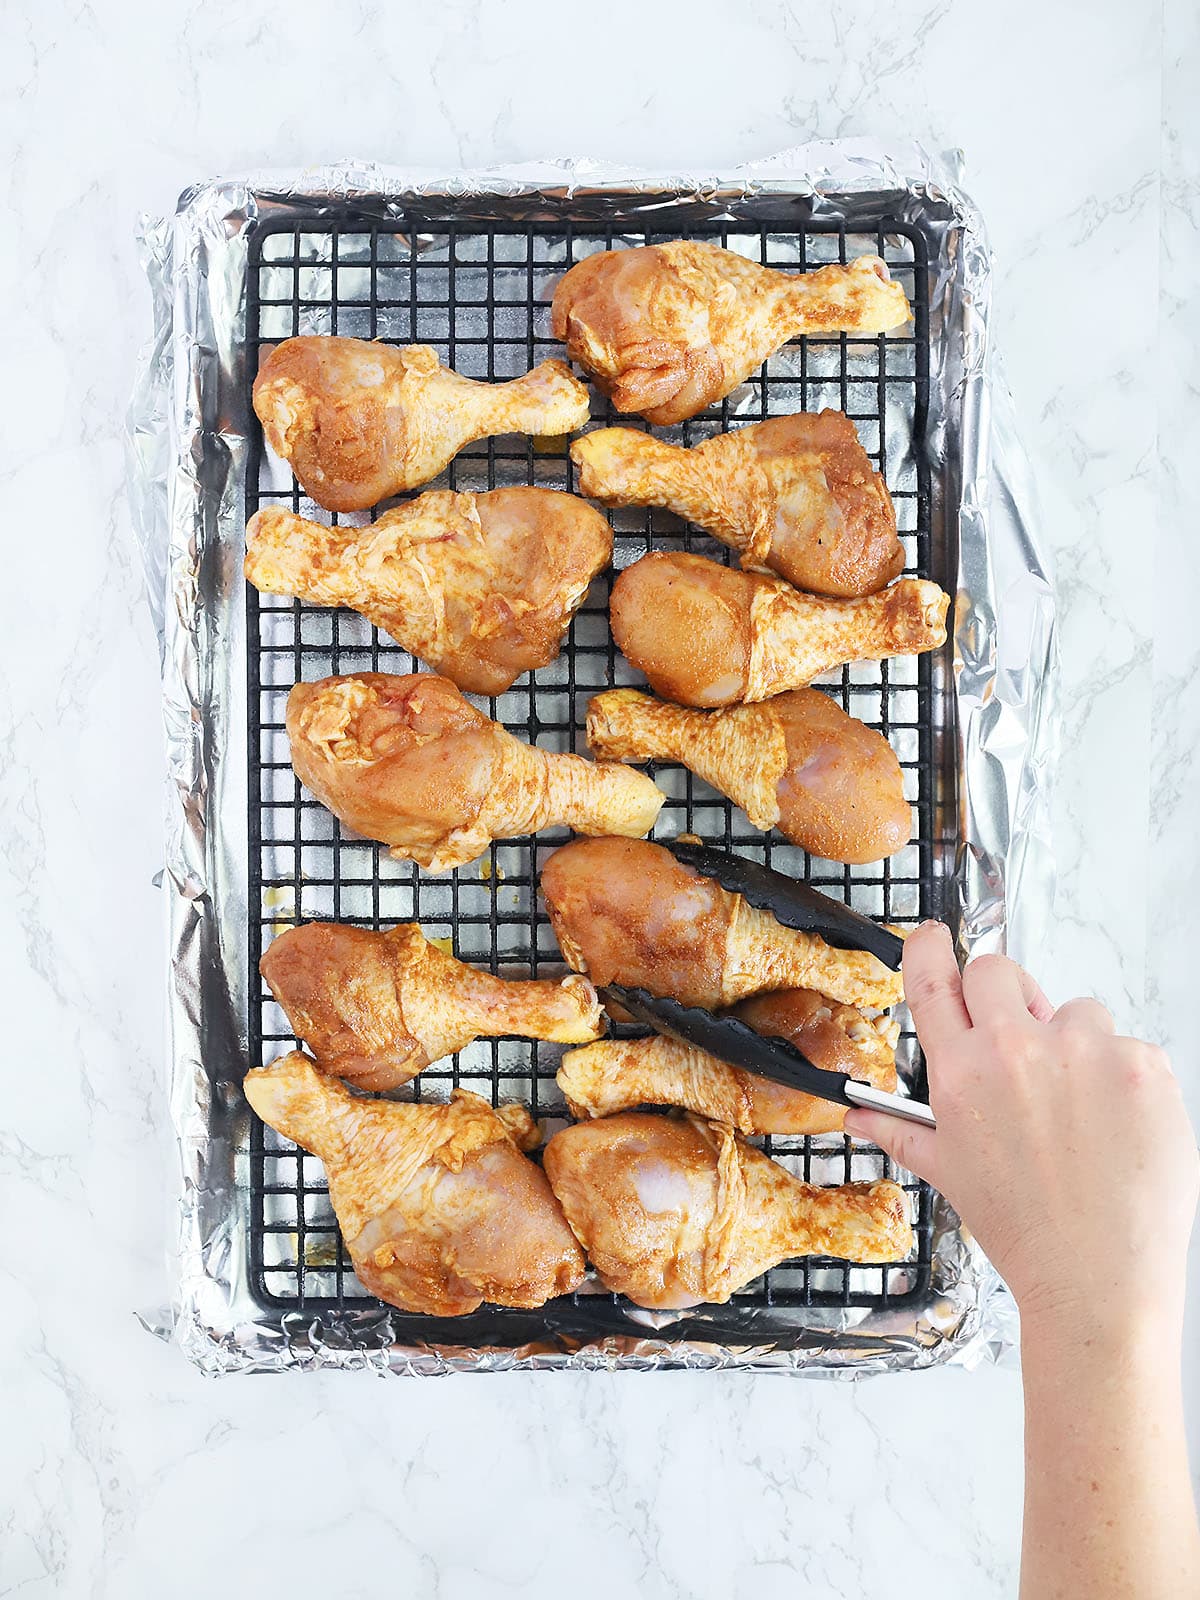 Using tongs to arrange uncooked chicken drumsticks on a baking sheet